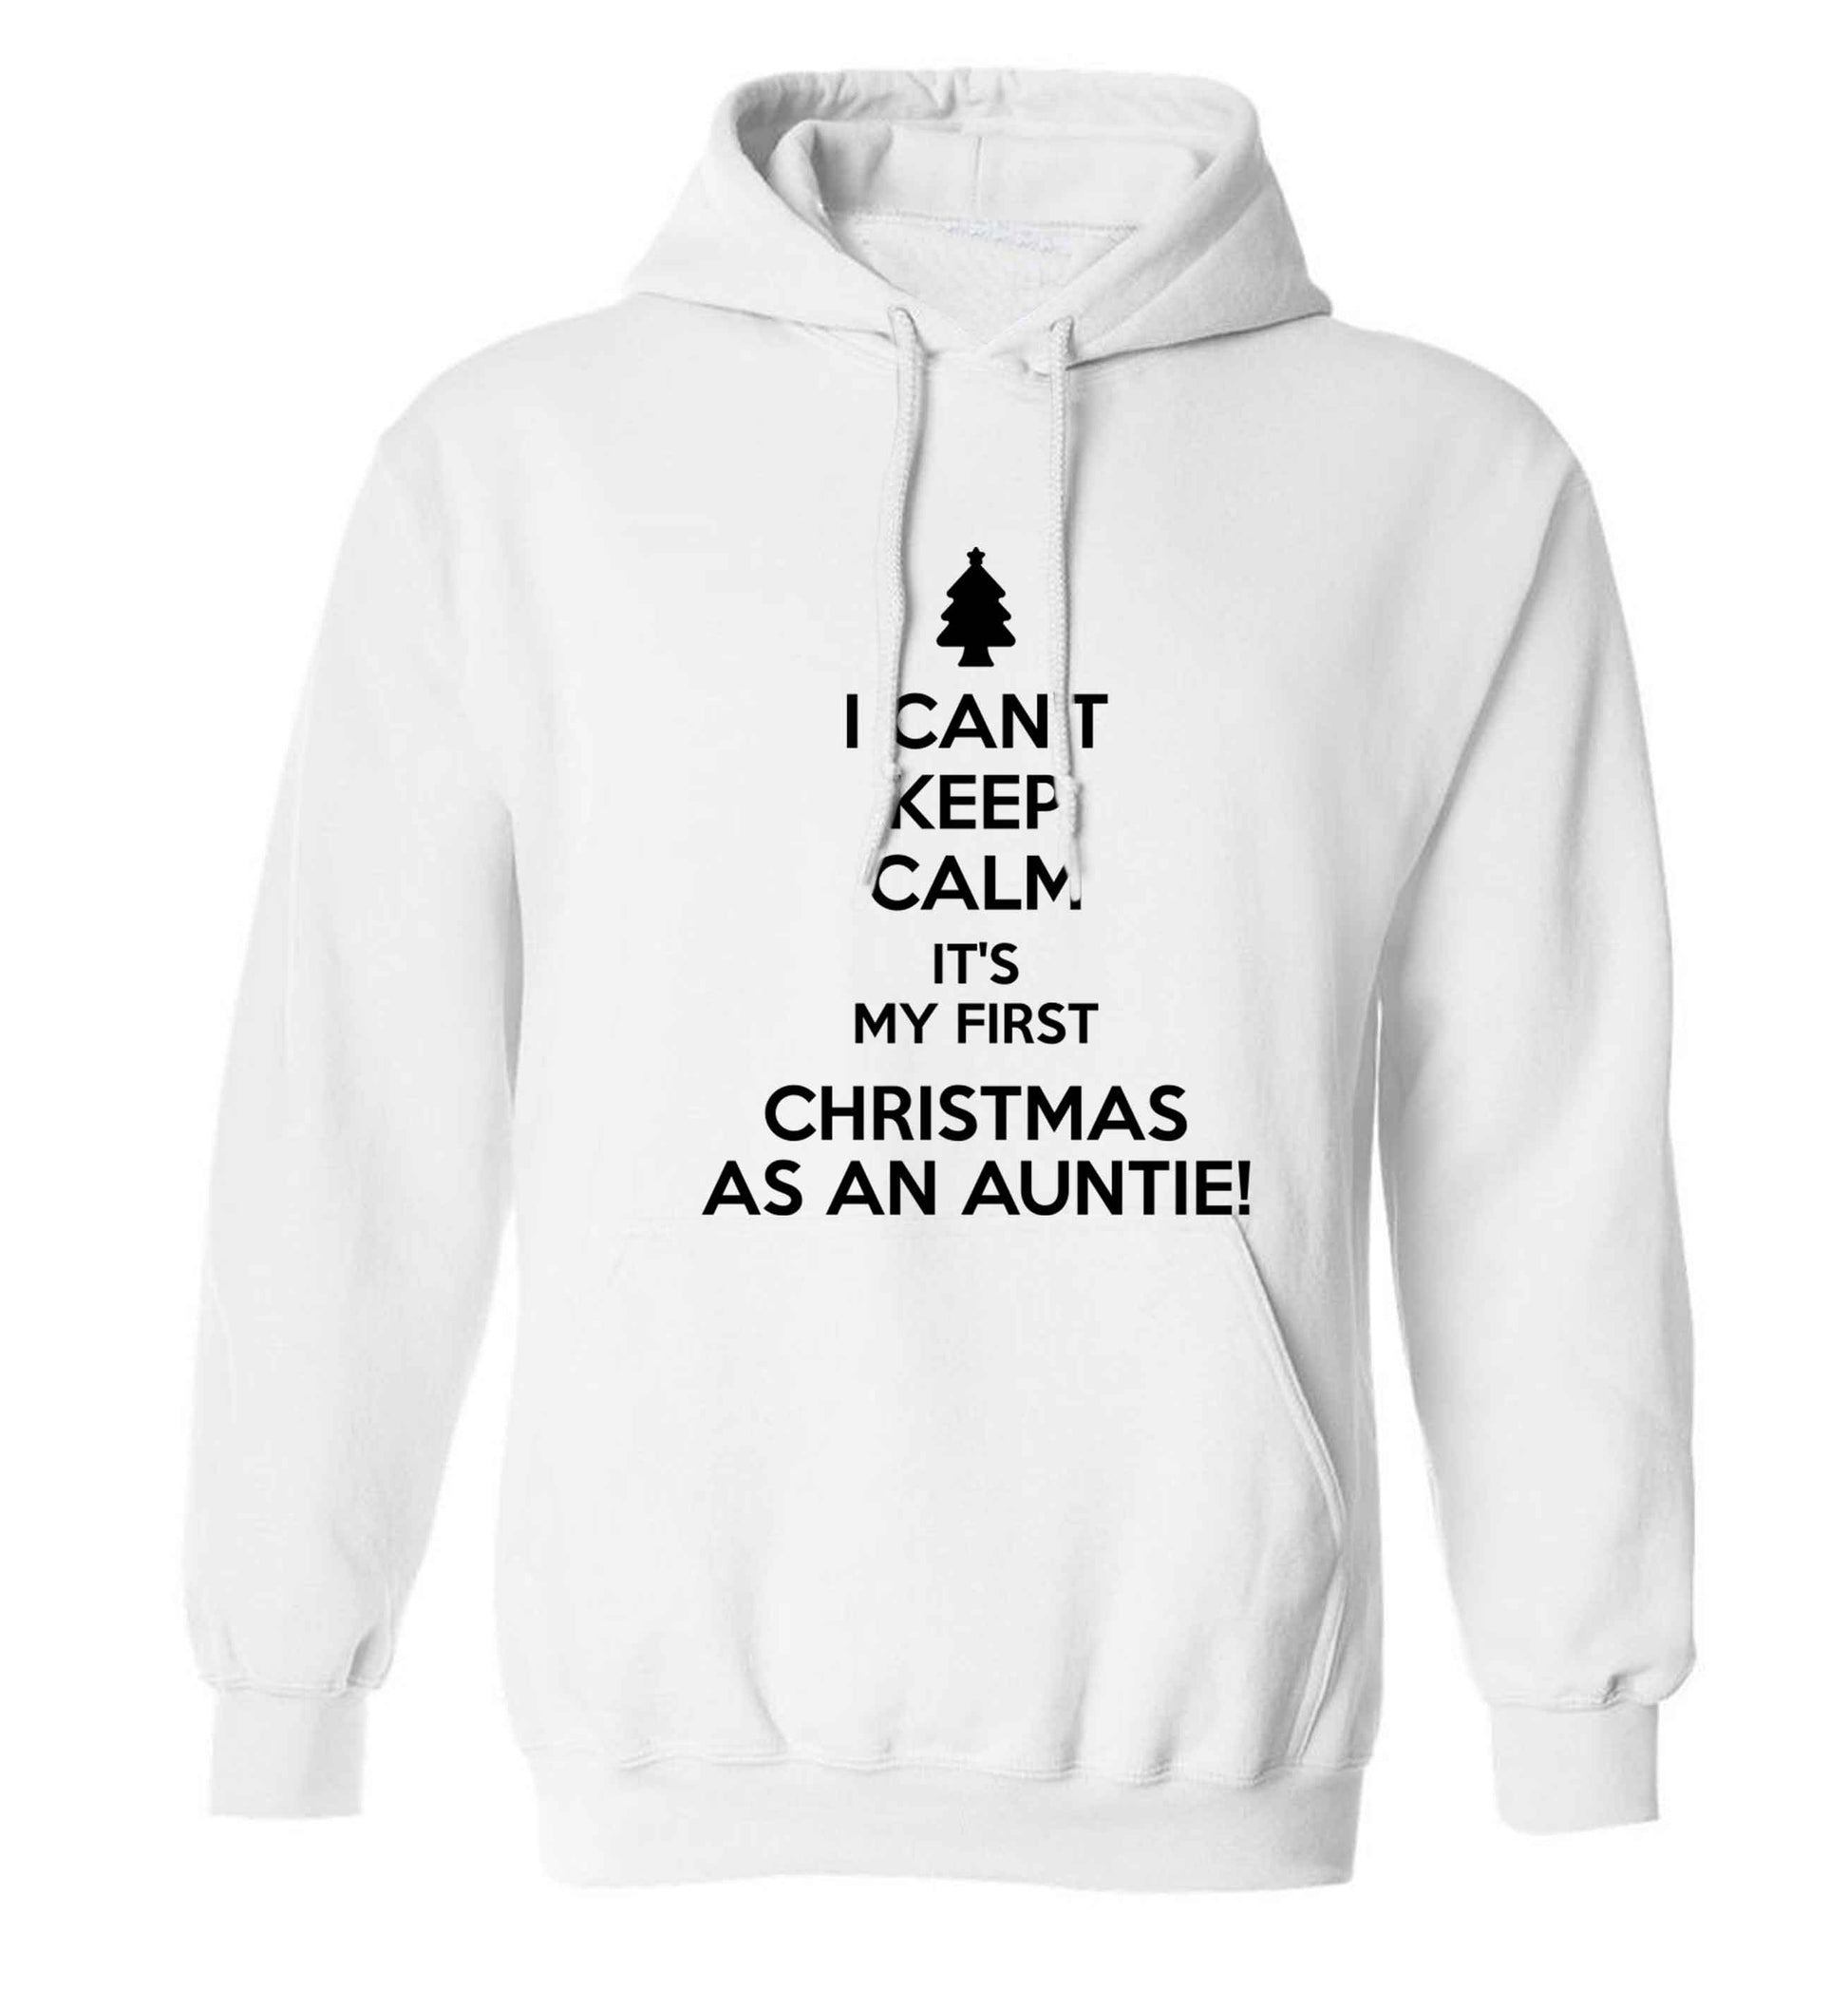 I can't keep calm it's my first Christmas as an auntie! adults unisex white hoodie 2XL